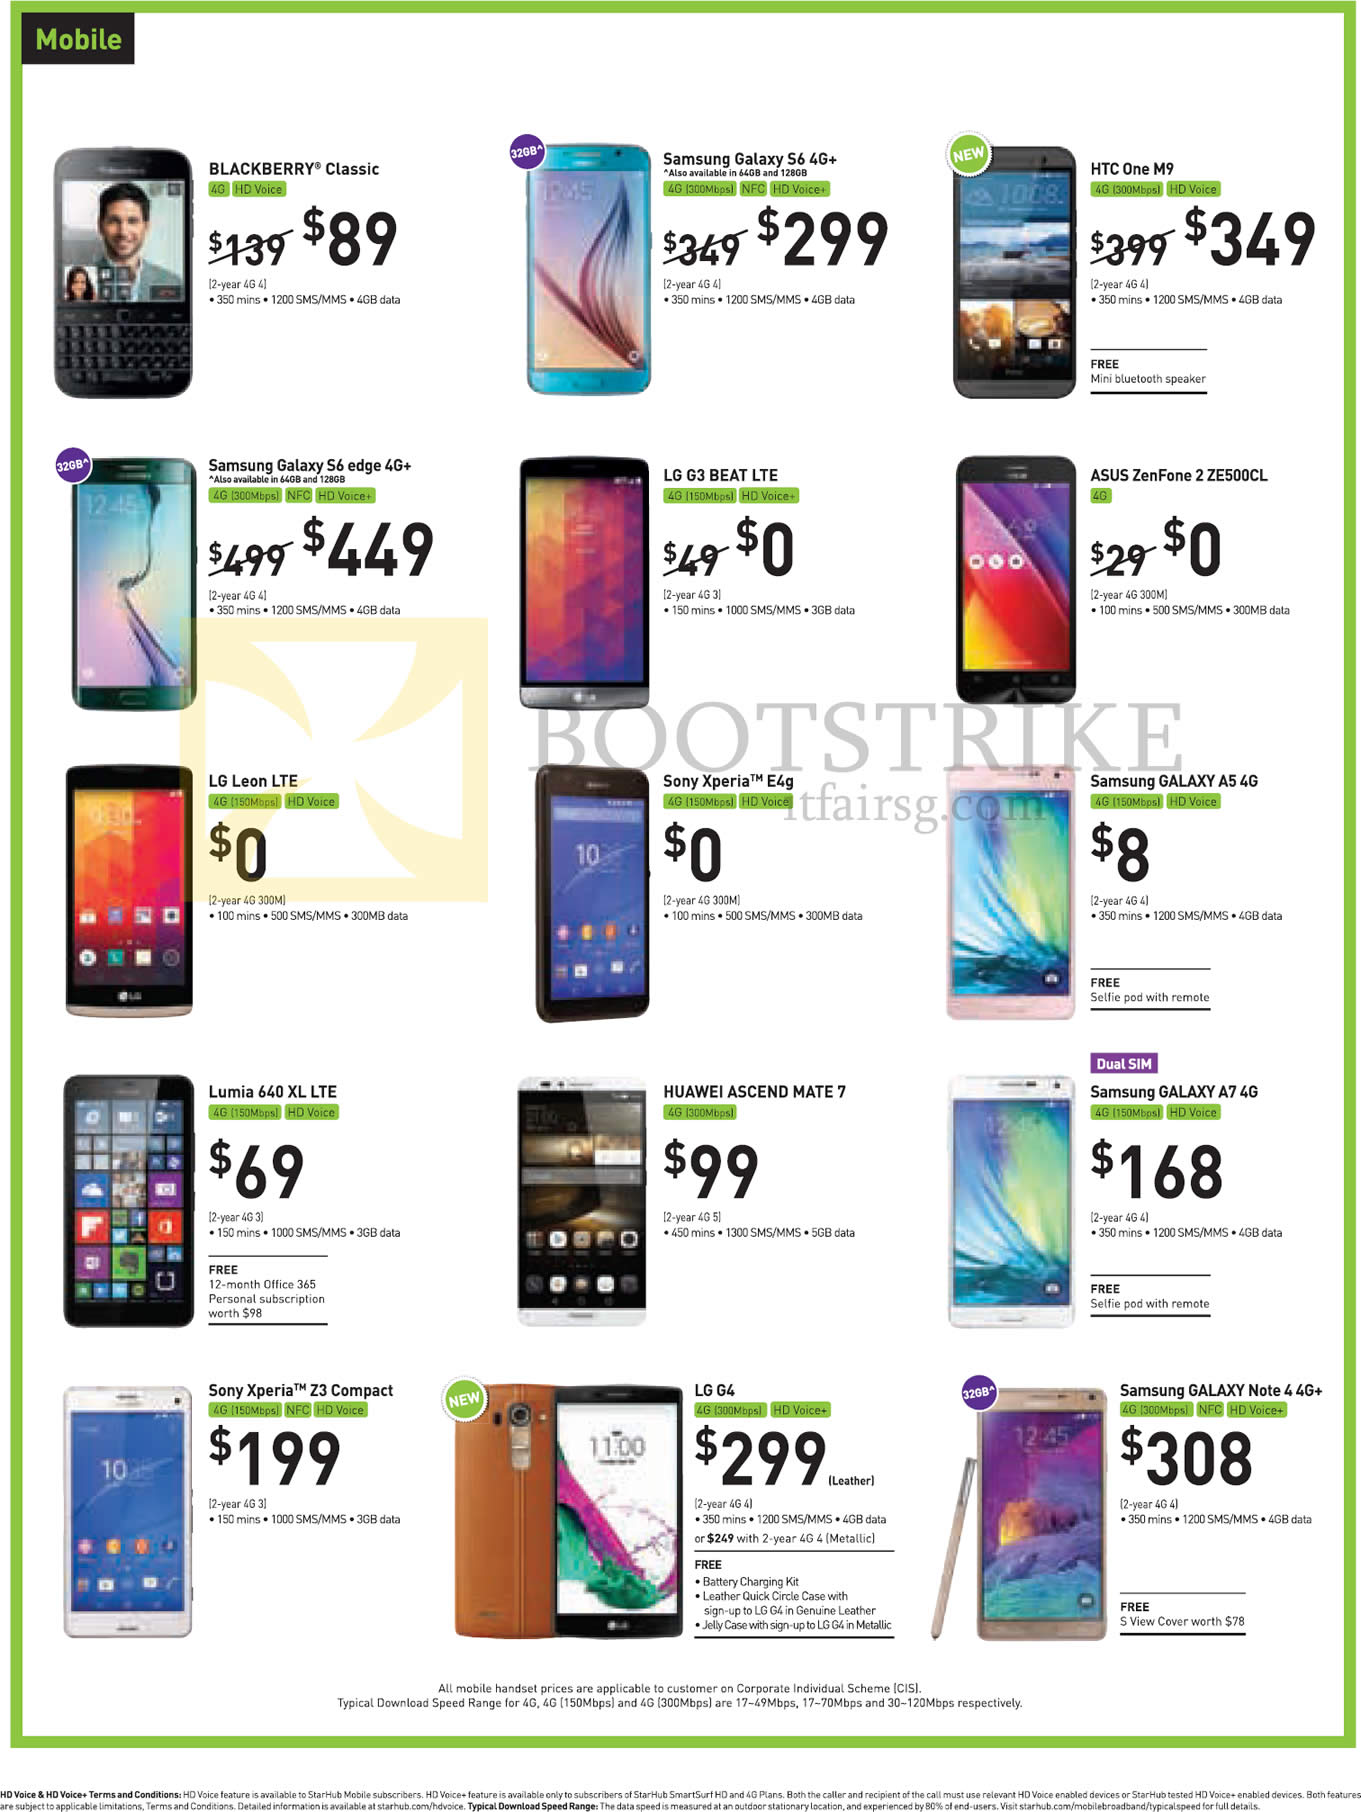 PC SHOW 2015 price list image brochure of Starhub ASUS Zenfone 2 Ze500cl, HTC One M9, Huawei Ascend Mate 7, LG G3 Beat Lte G4 Leon, Lumia 640 Xl, Samsung Galaxy A5 A7 Note 4 S6 Edge, Sony Xperia E4g Z3